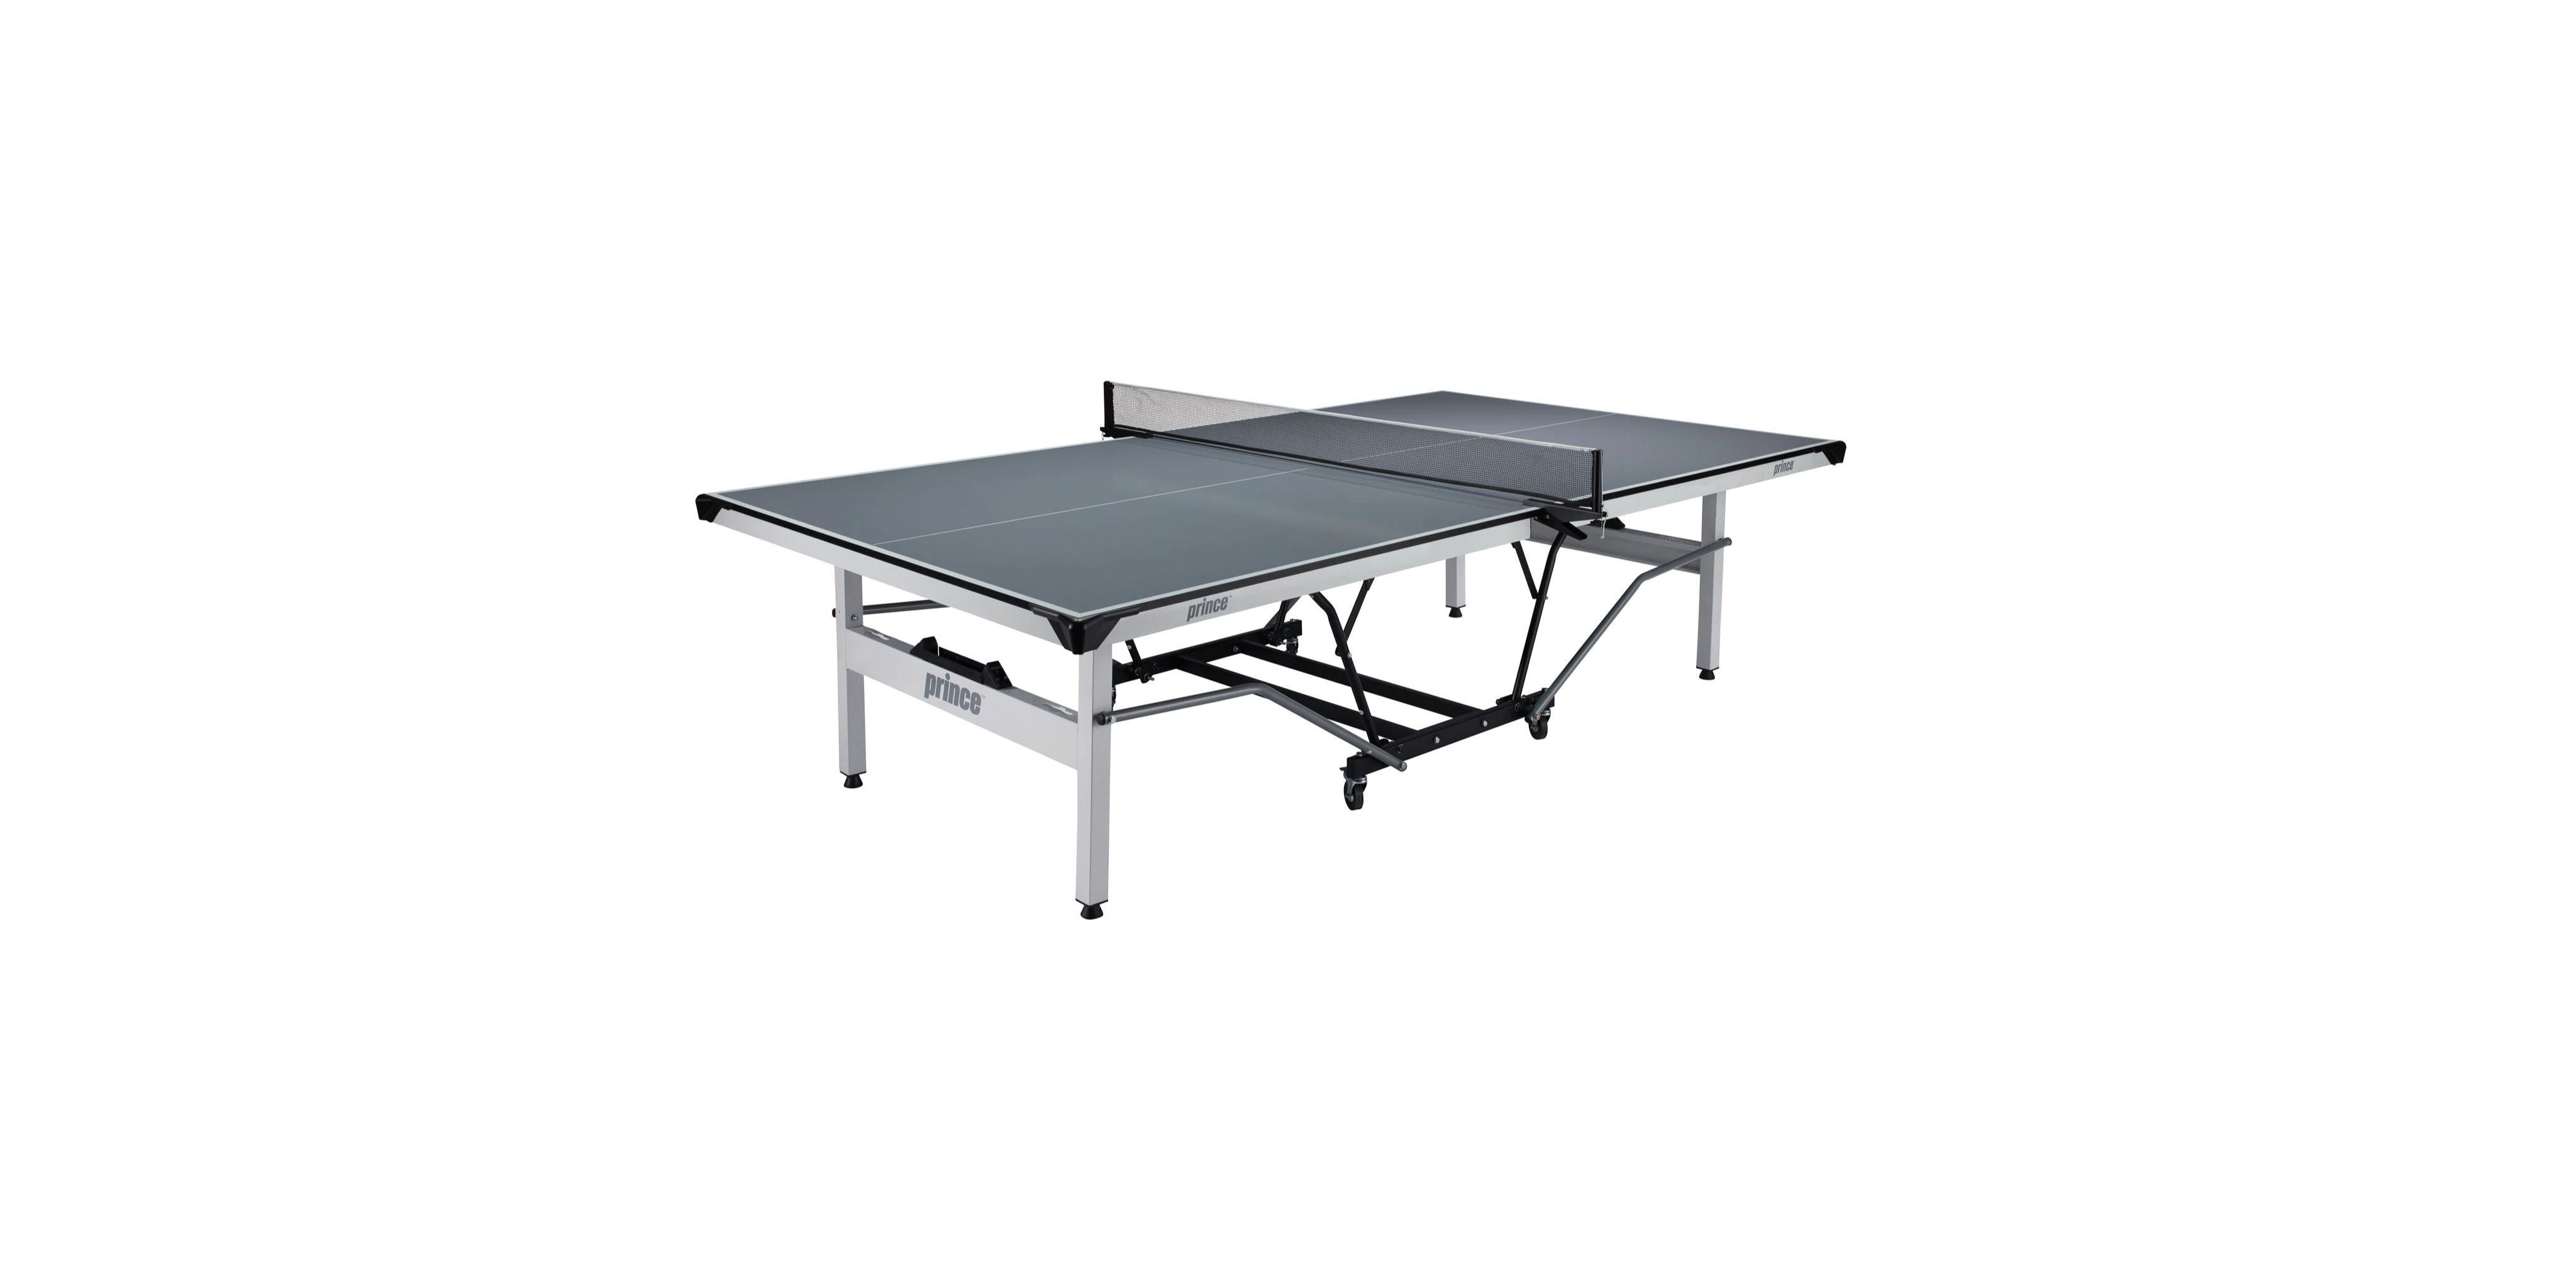 Prince Tournament 6800 Indoor Table Tennis Table $270 + store pickup